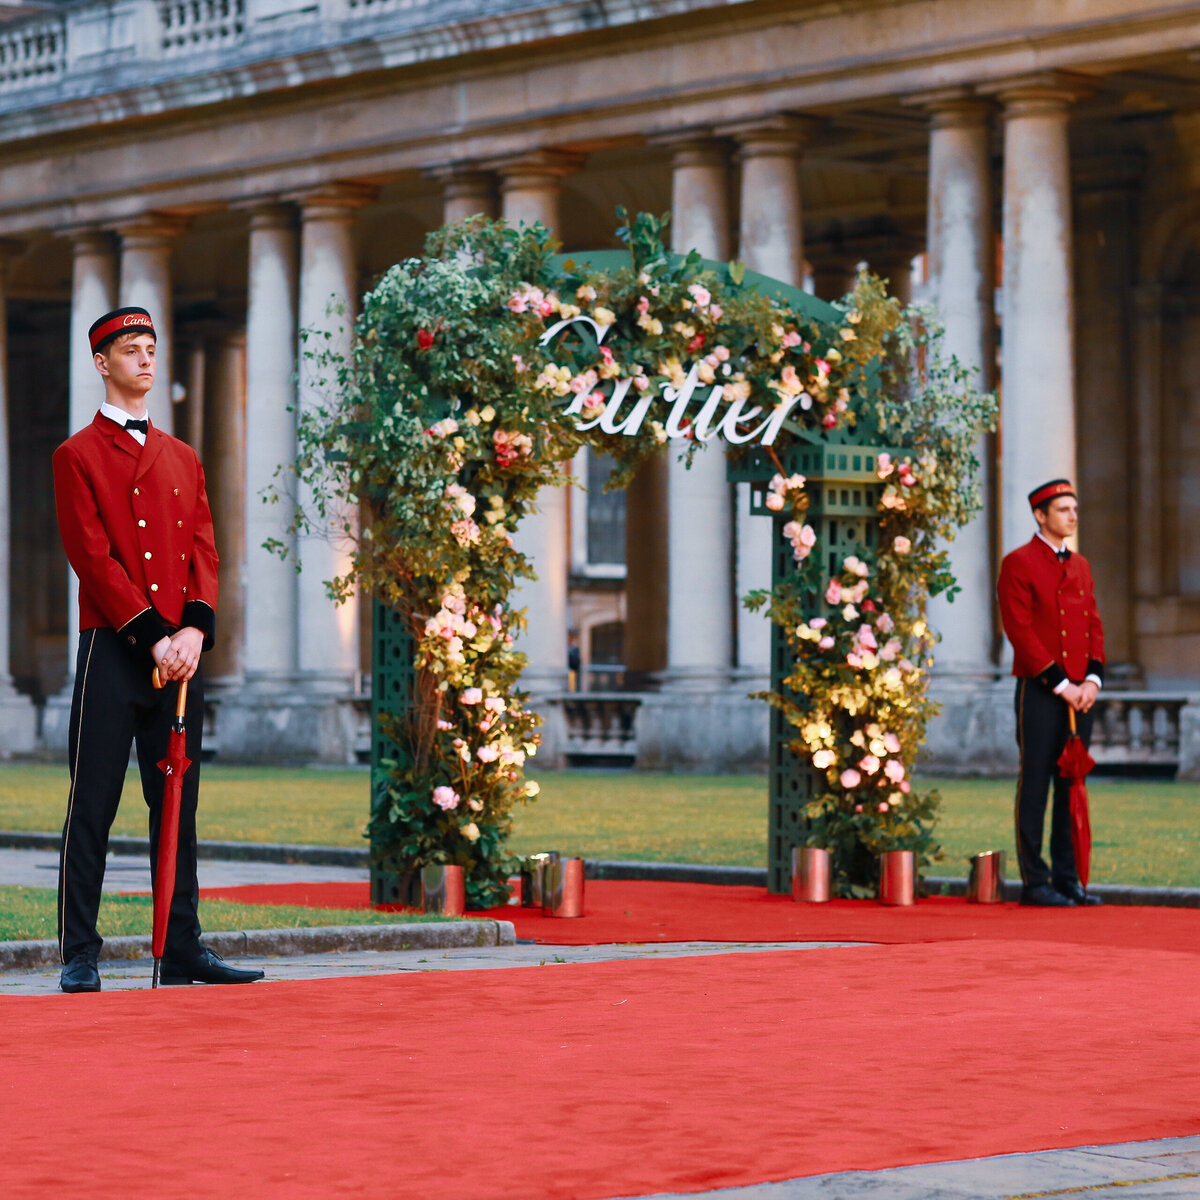 A red carpet with a floral arch at the Old Royal Naval College in London for an event for Cartier.